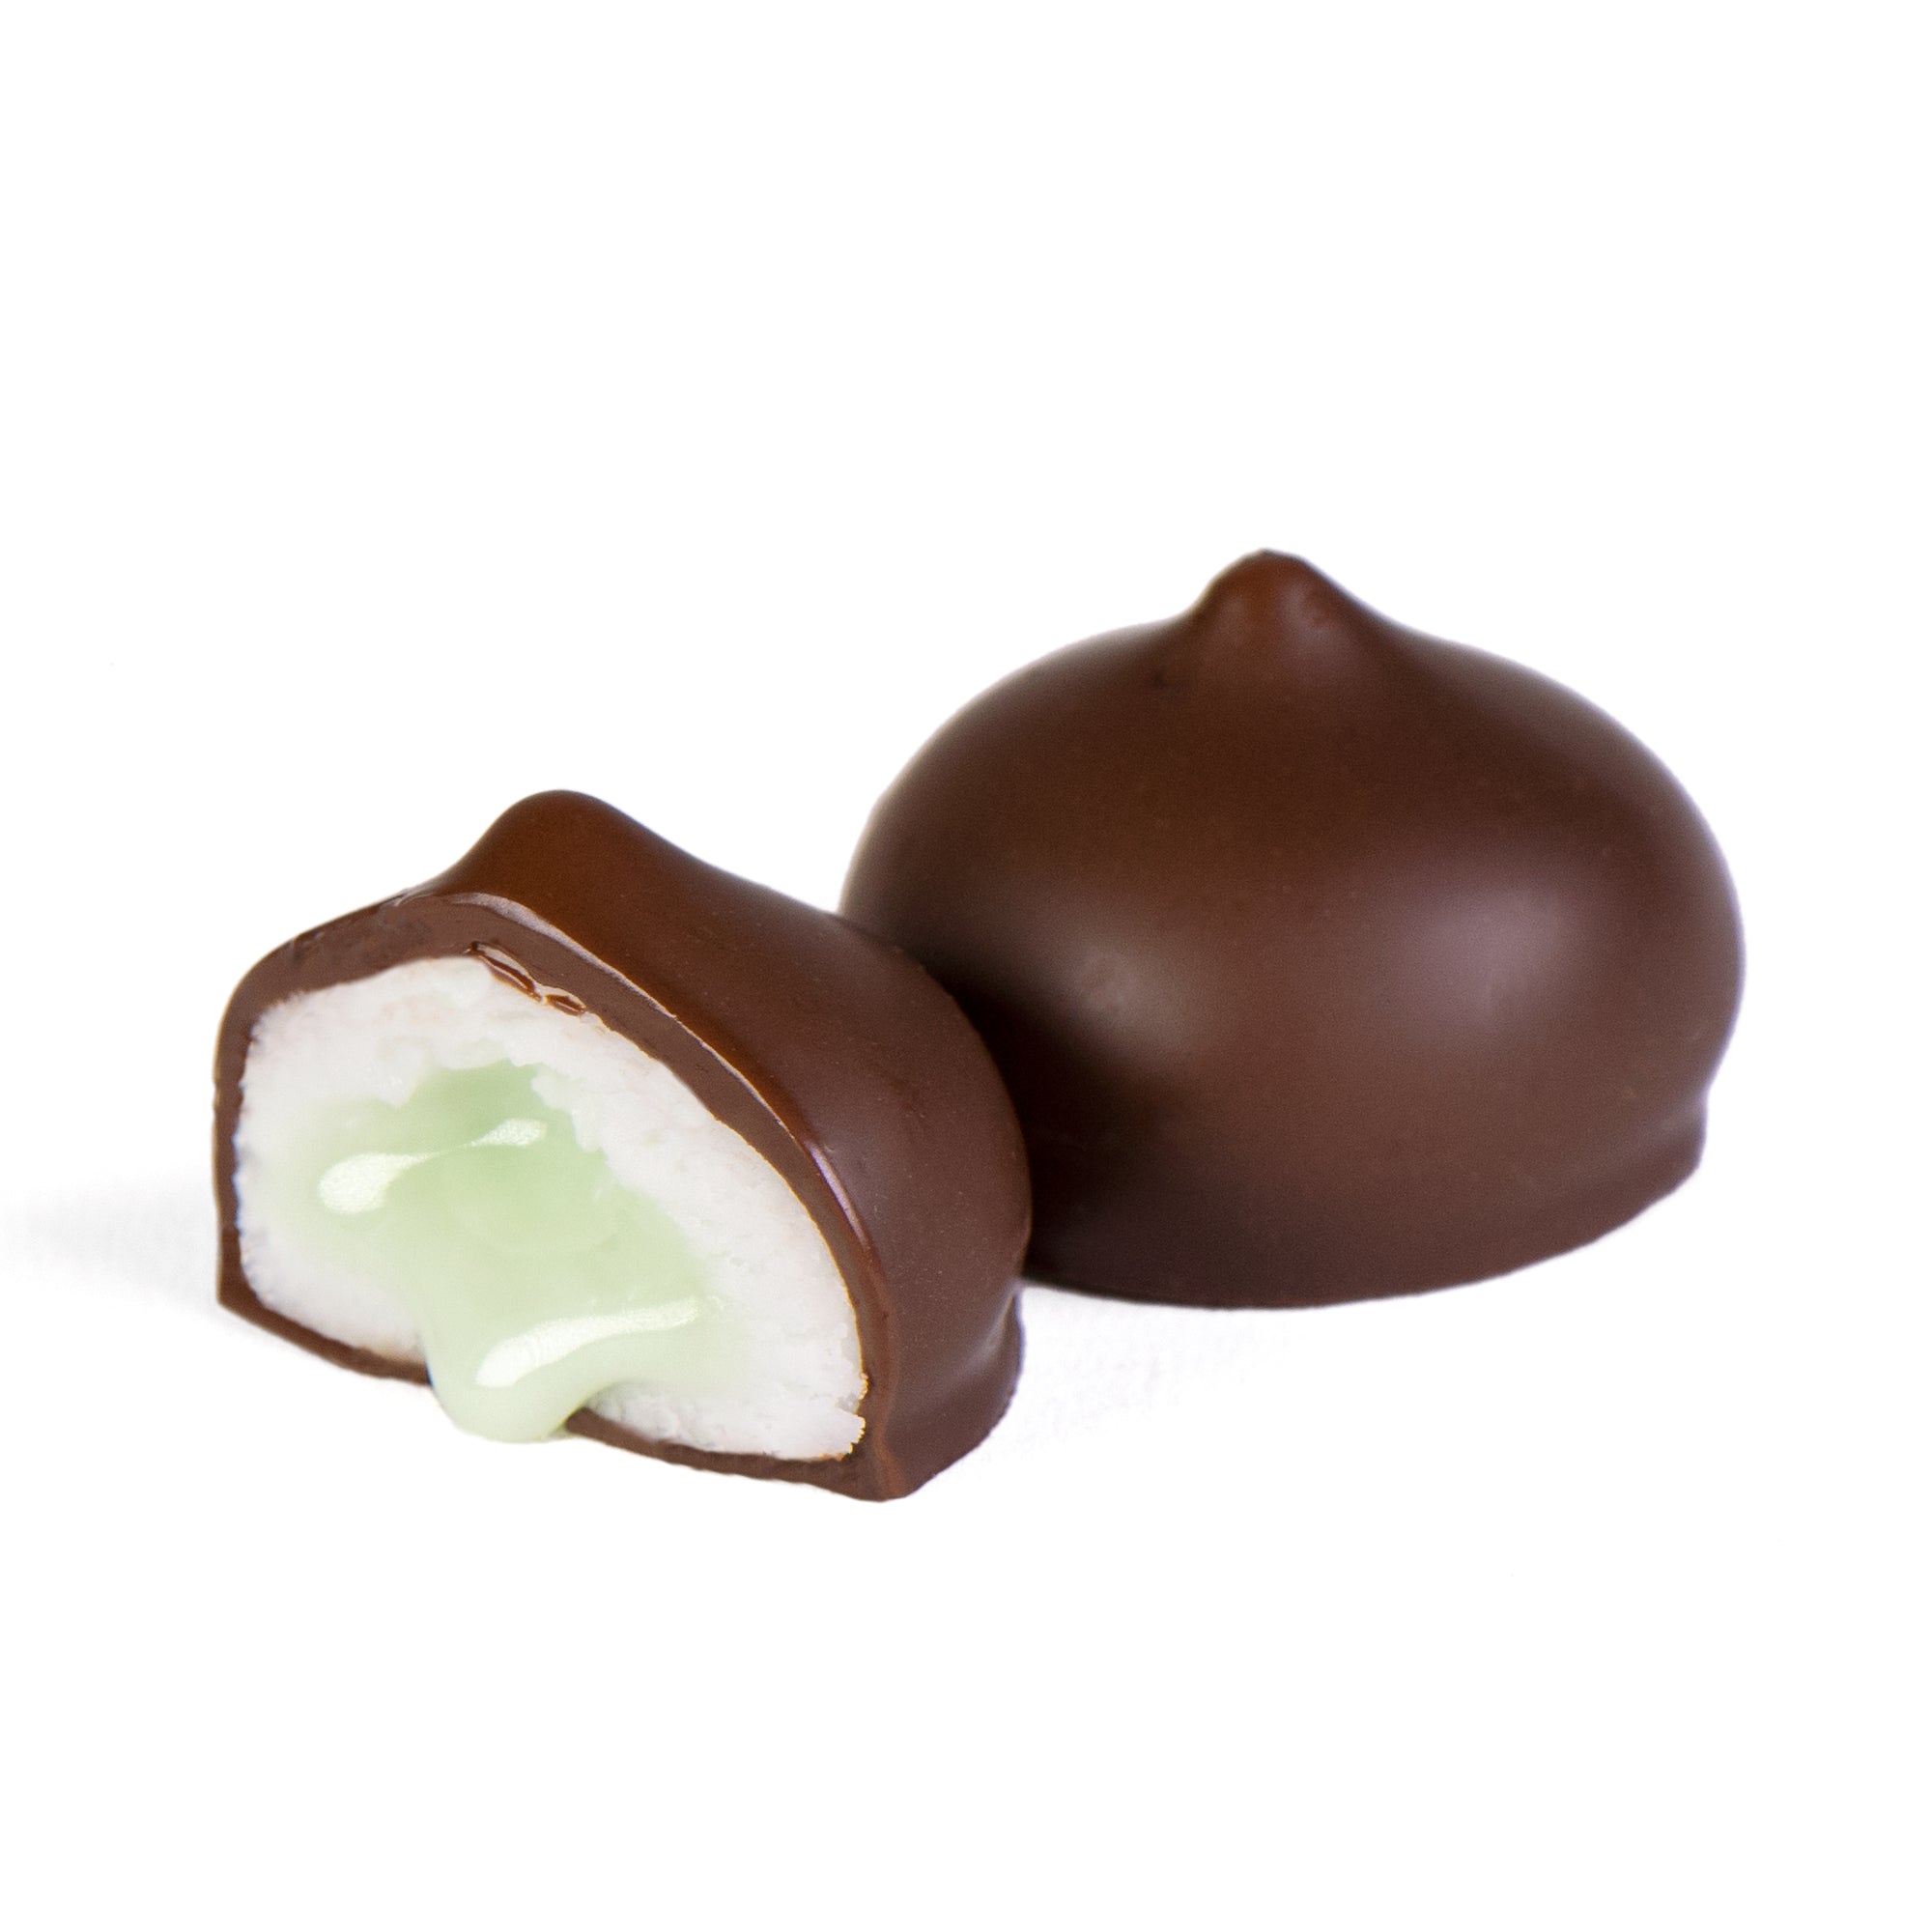 Strawberry Kiwi Chocolate Drops: A Sweet and Refreshing Treat.  Fames Chocolate   